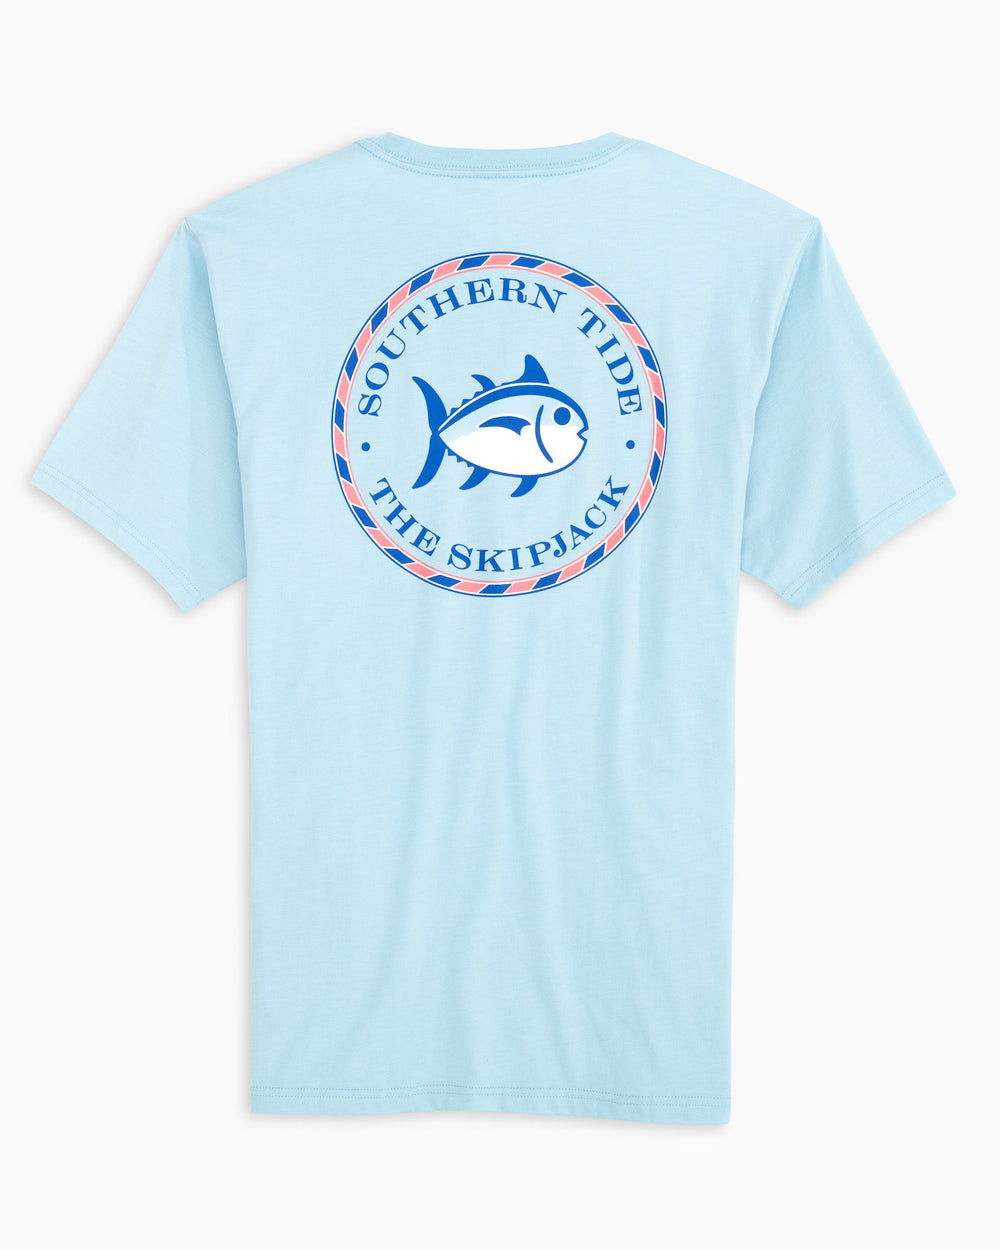 The model back view of the Women's Original Skipjack Medallion T-Shirt by Southern Tide - Dream Blue